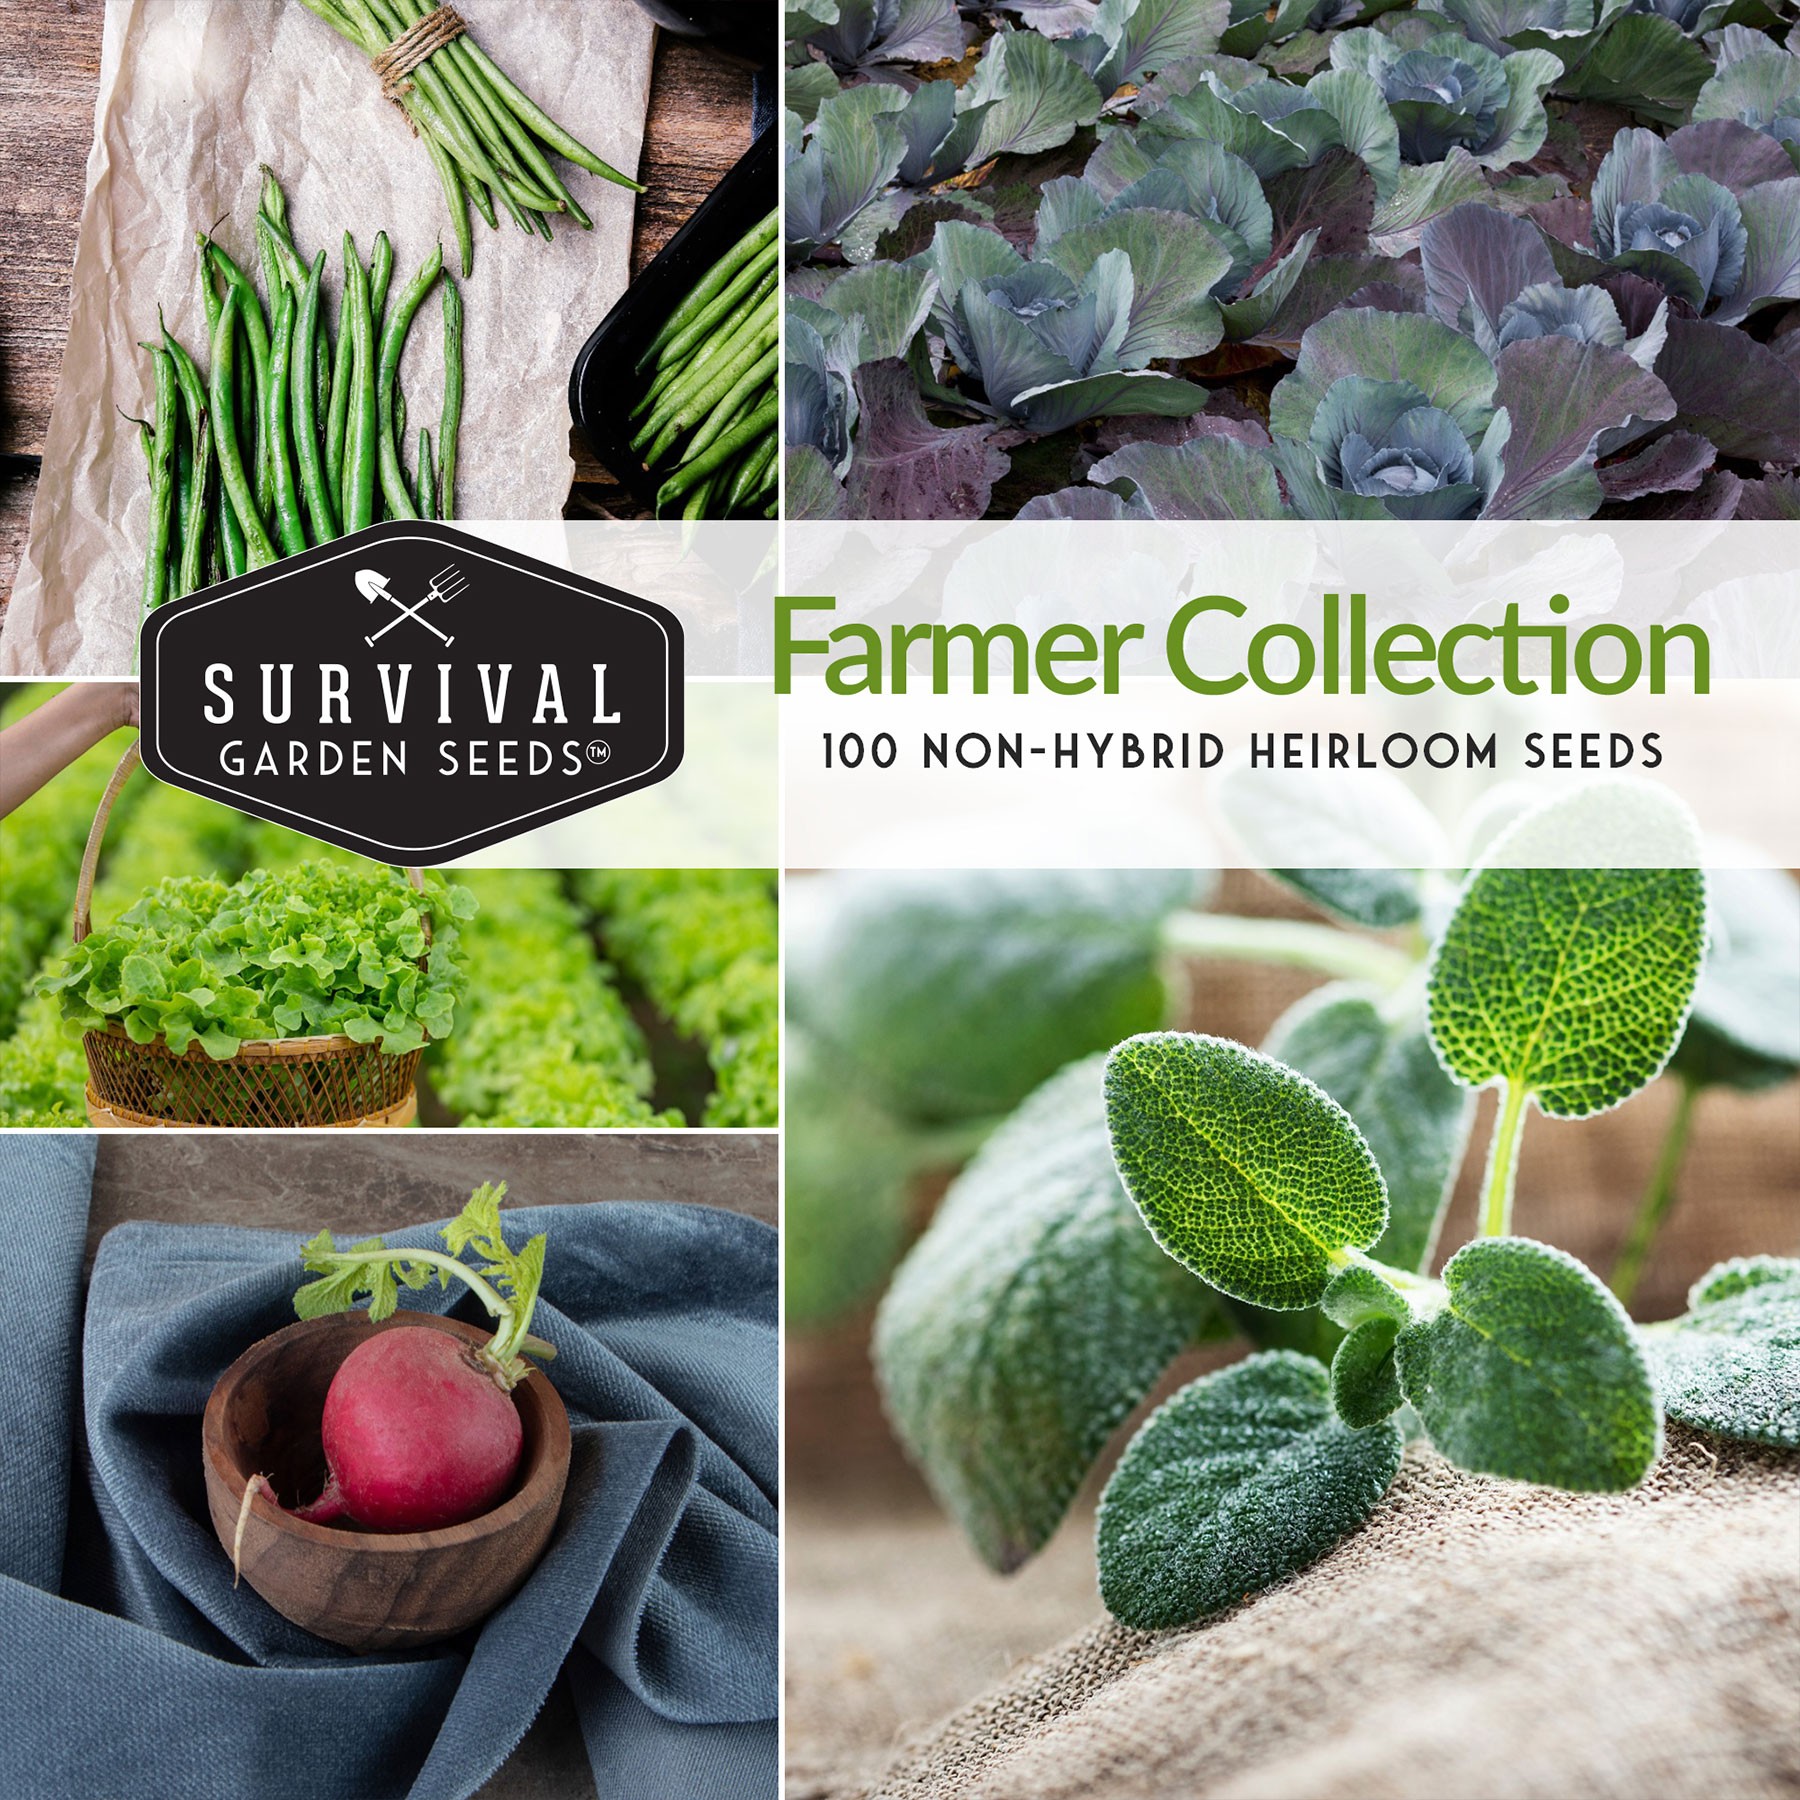 Farmers Seed Collection - 100 non-hybrid heirloom seeds